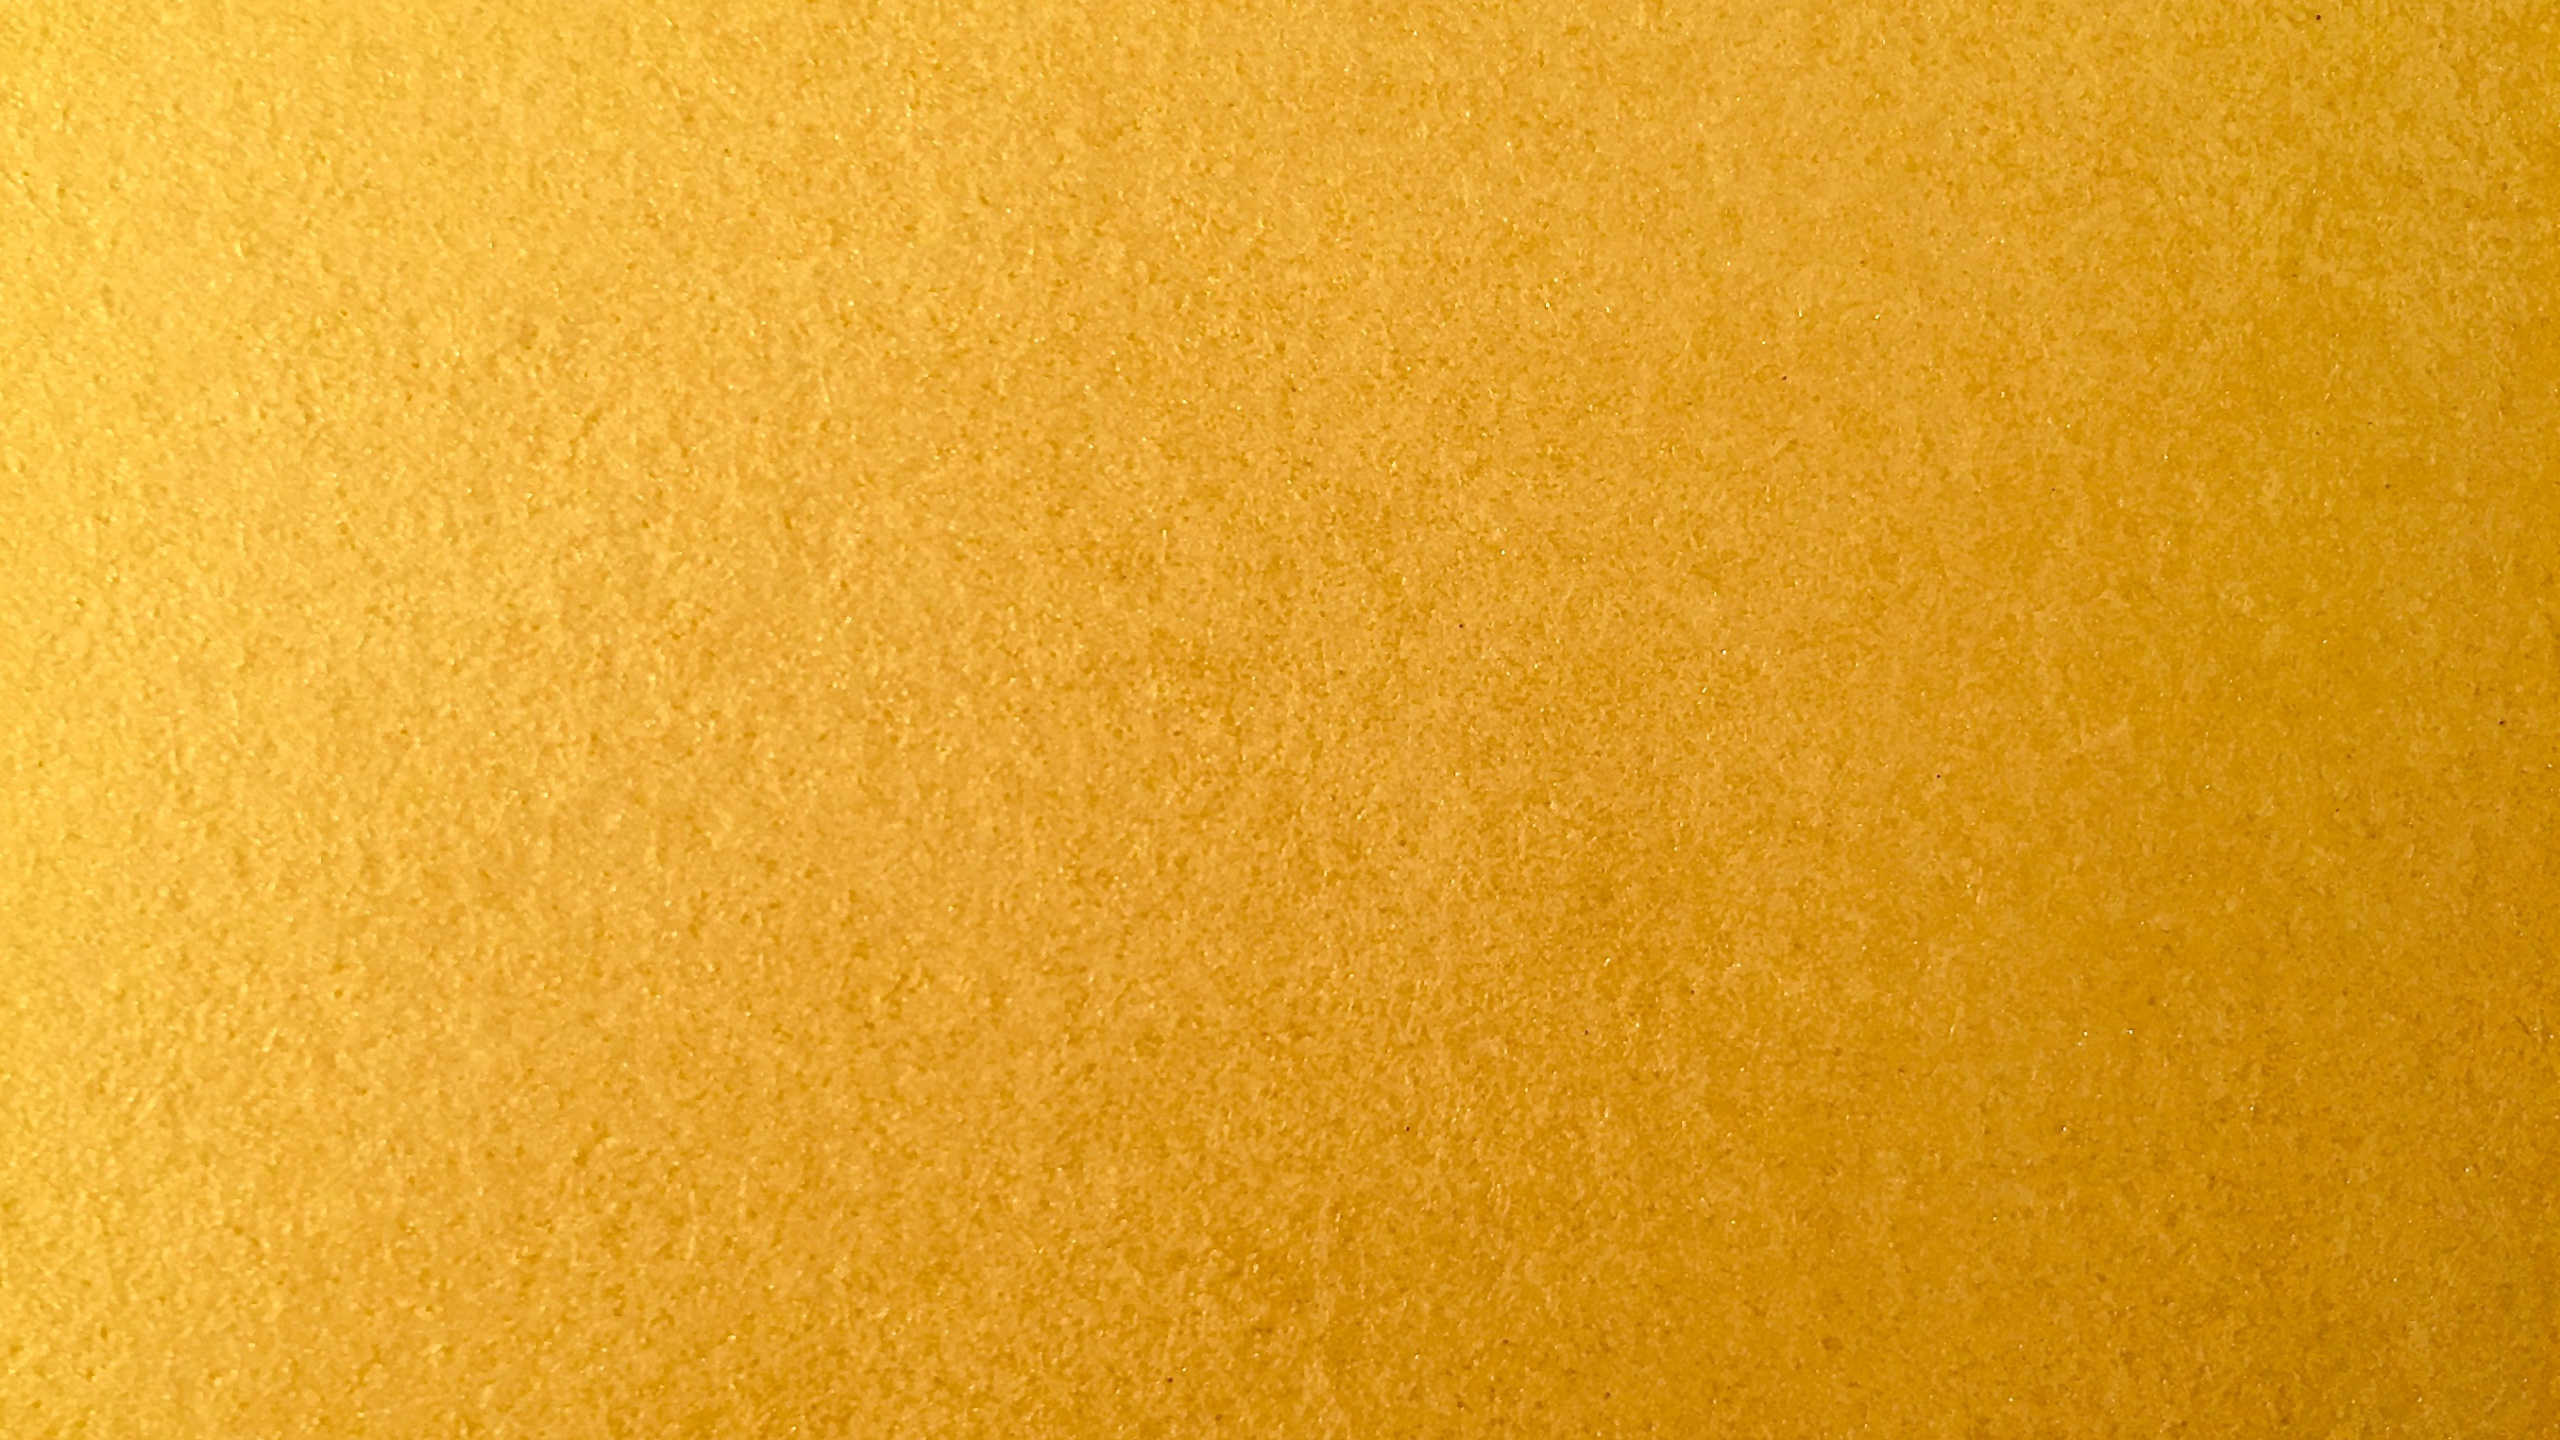 Yellow Textile in Close up Image. Wallpaper in 2560x1440 Resolution